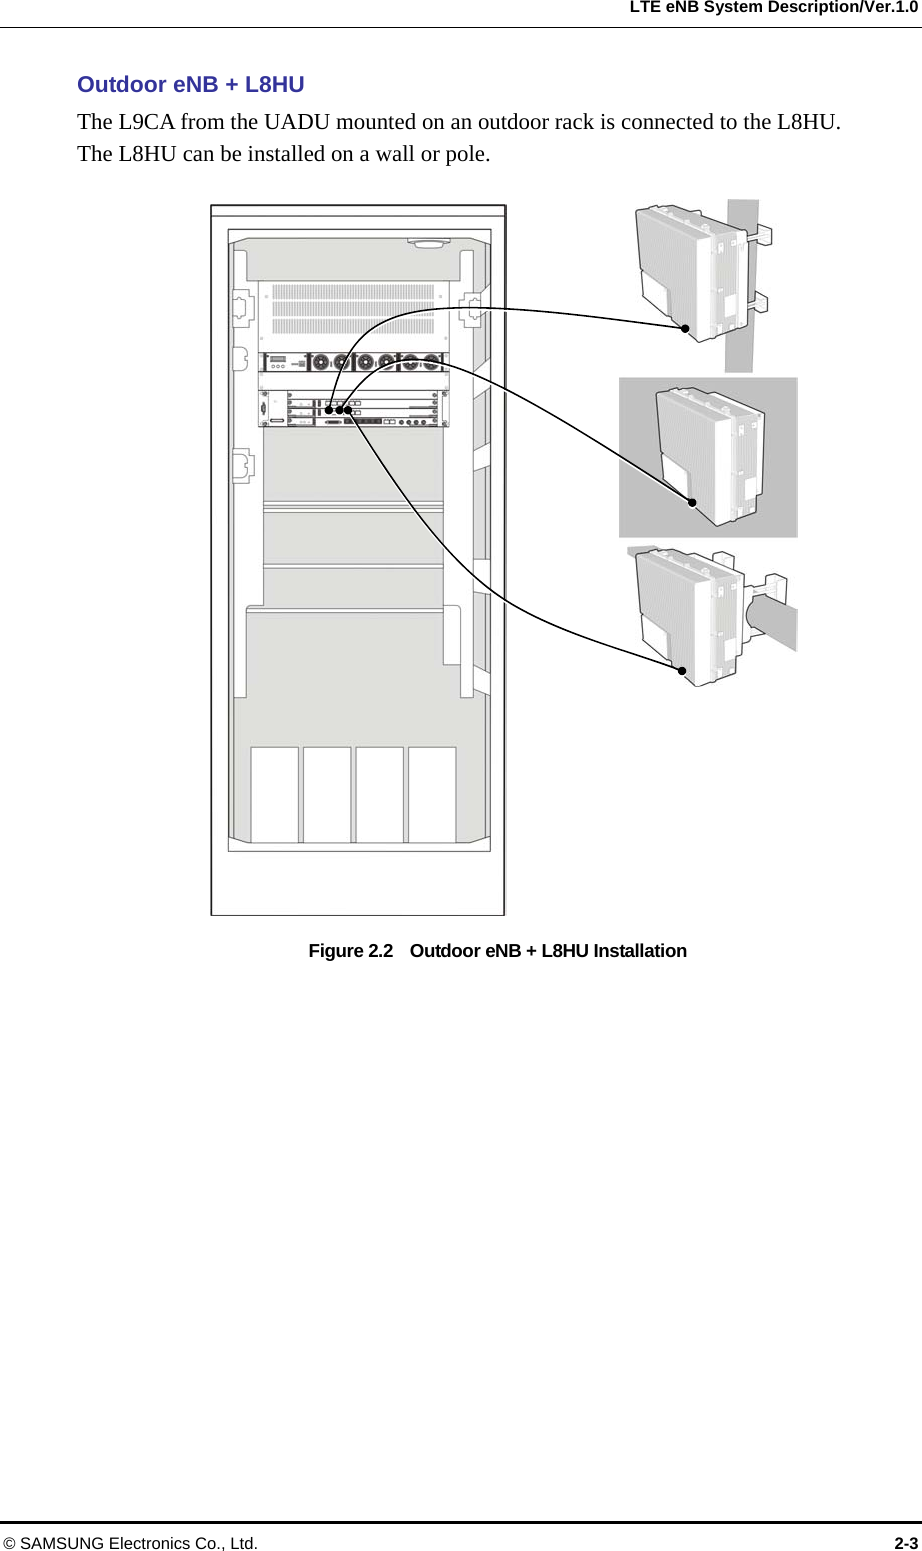  LTE eNB System Description/Ver.1.0 Outdoor eNB + L8HU The L9CA from the UADU mounted on an outdoor rack is connected to the L8HU.   The L8HU can be installed on a wall or pole.  Figure 2.2    Outdoor eNB + L8HU Installation   © SAMSUNG Electronics Co., Ltd.  2-3 